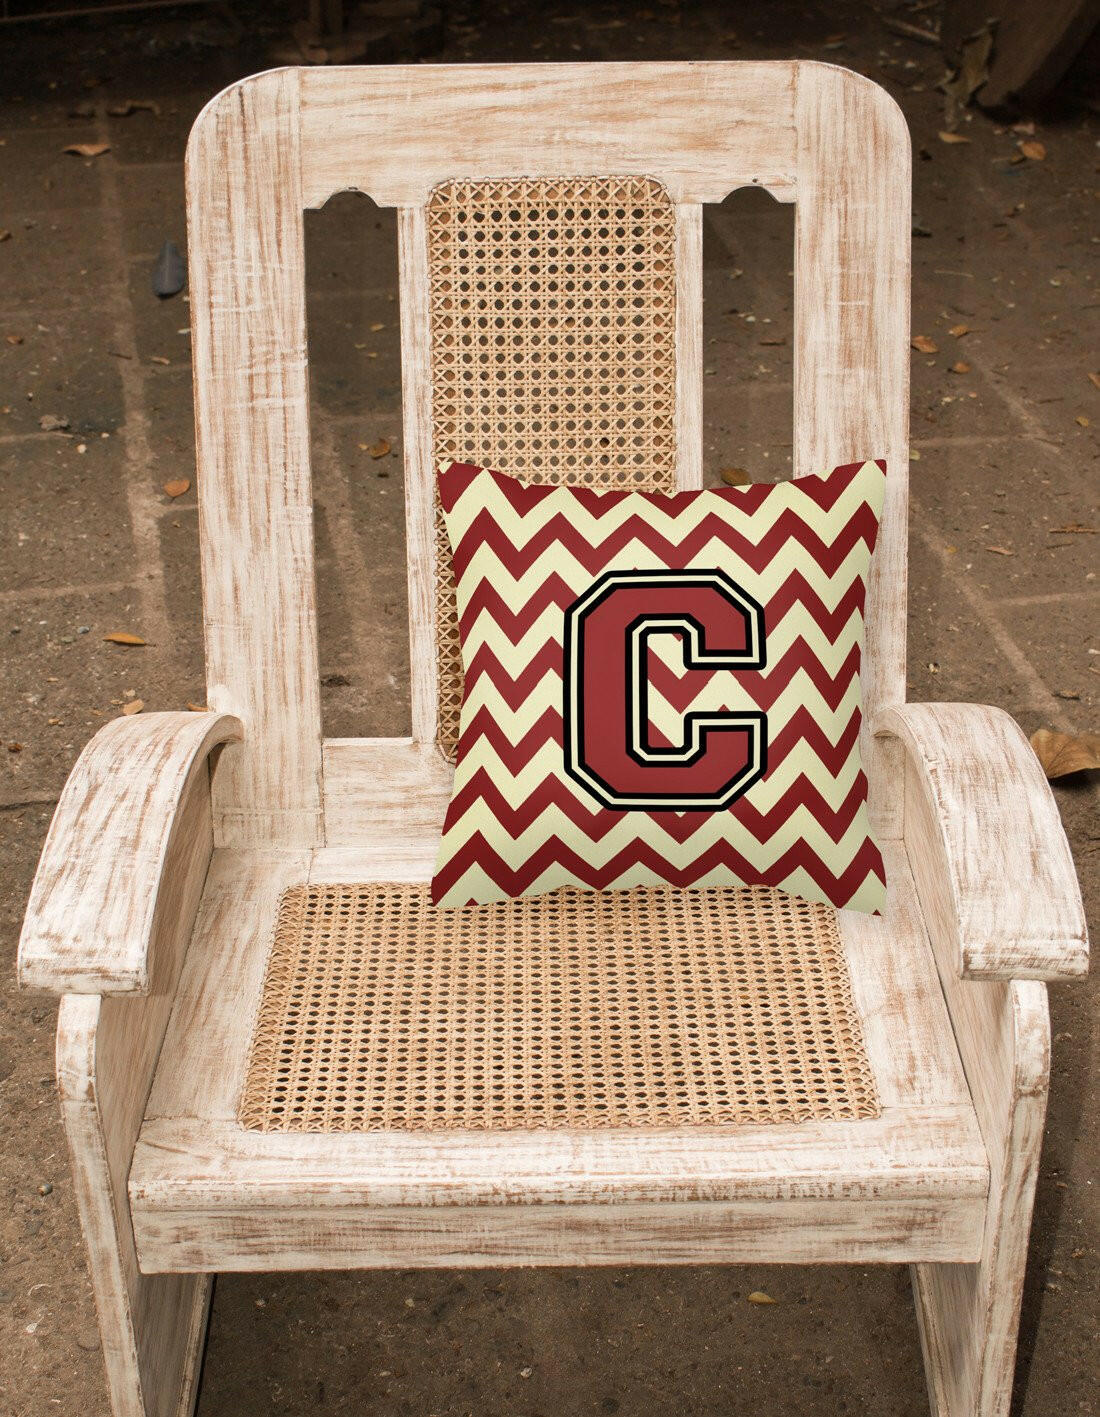 Letter C Chevron Maroon and Gold Fabric Decorative Pillow CJ1061-CPW1414 by Caroline's Treasures